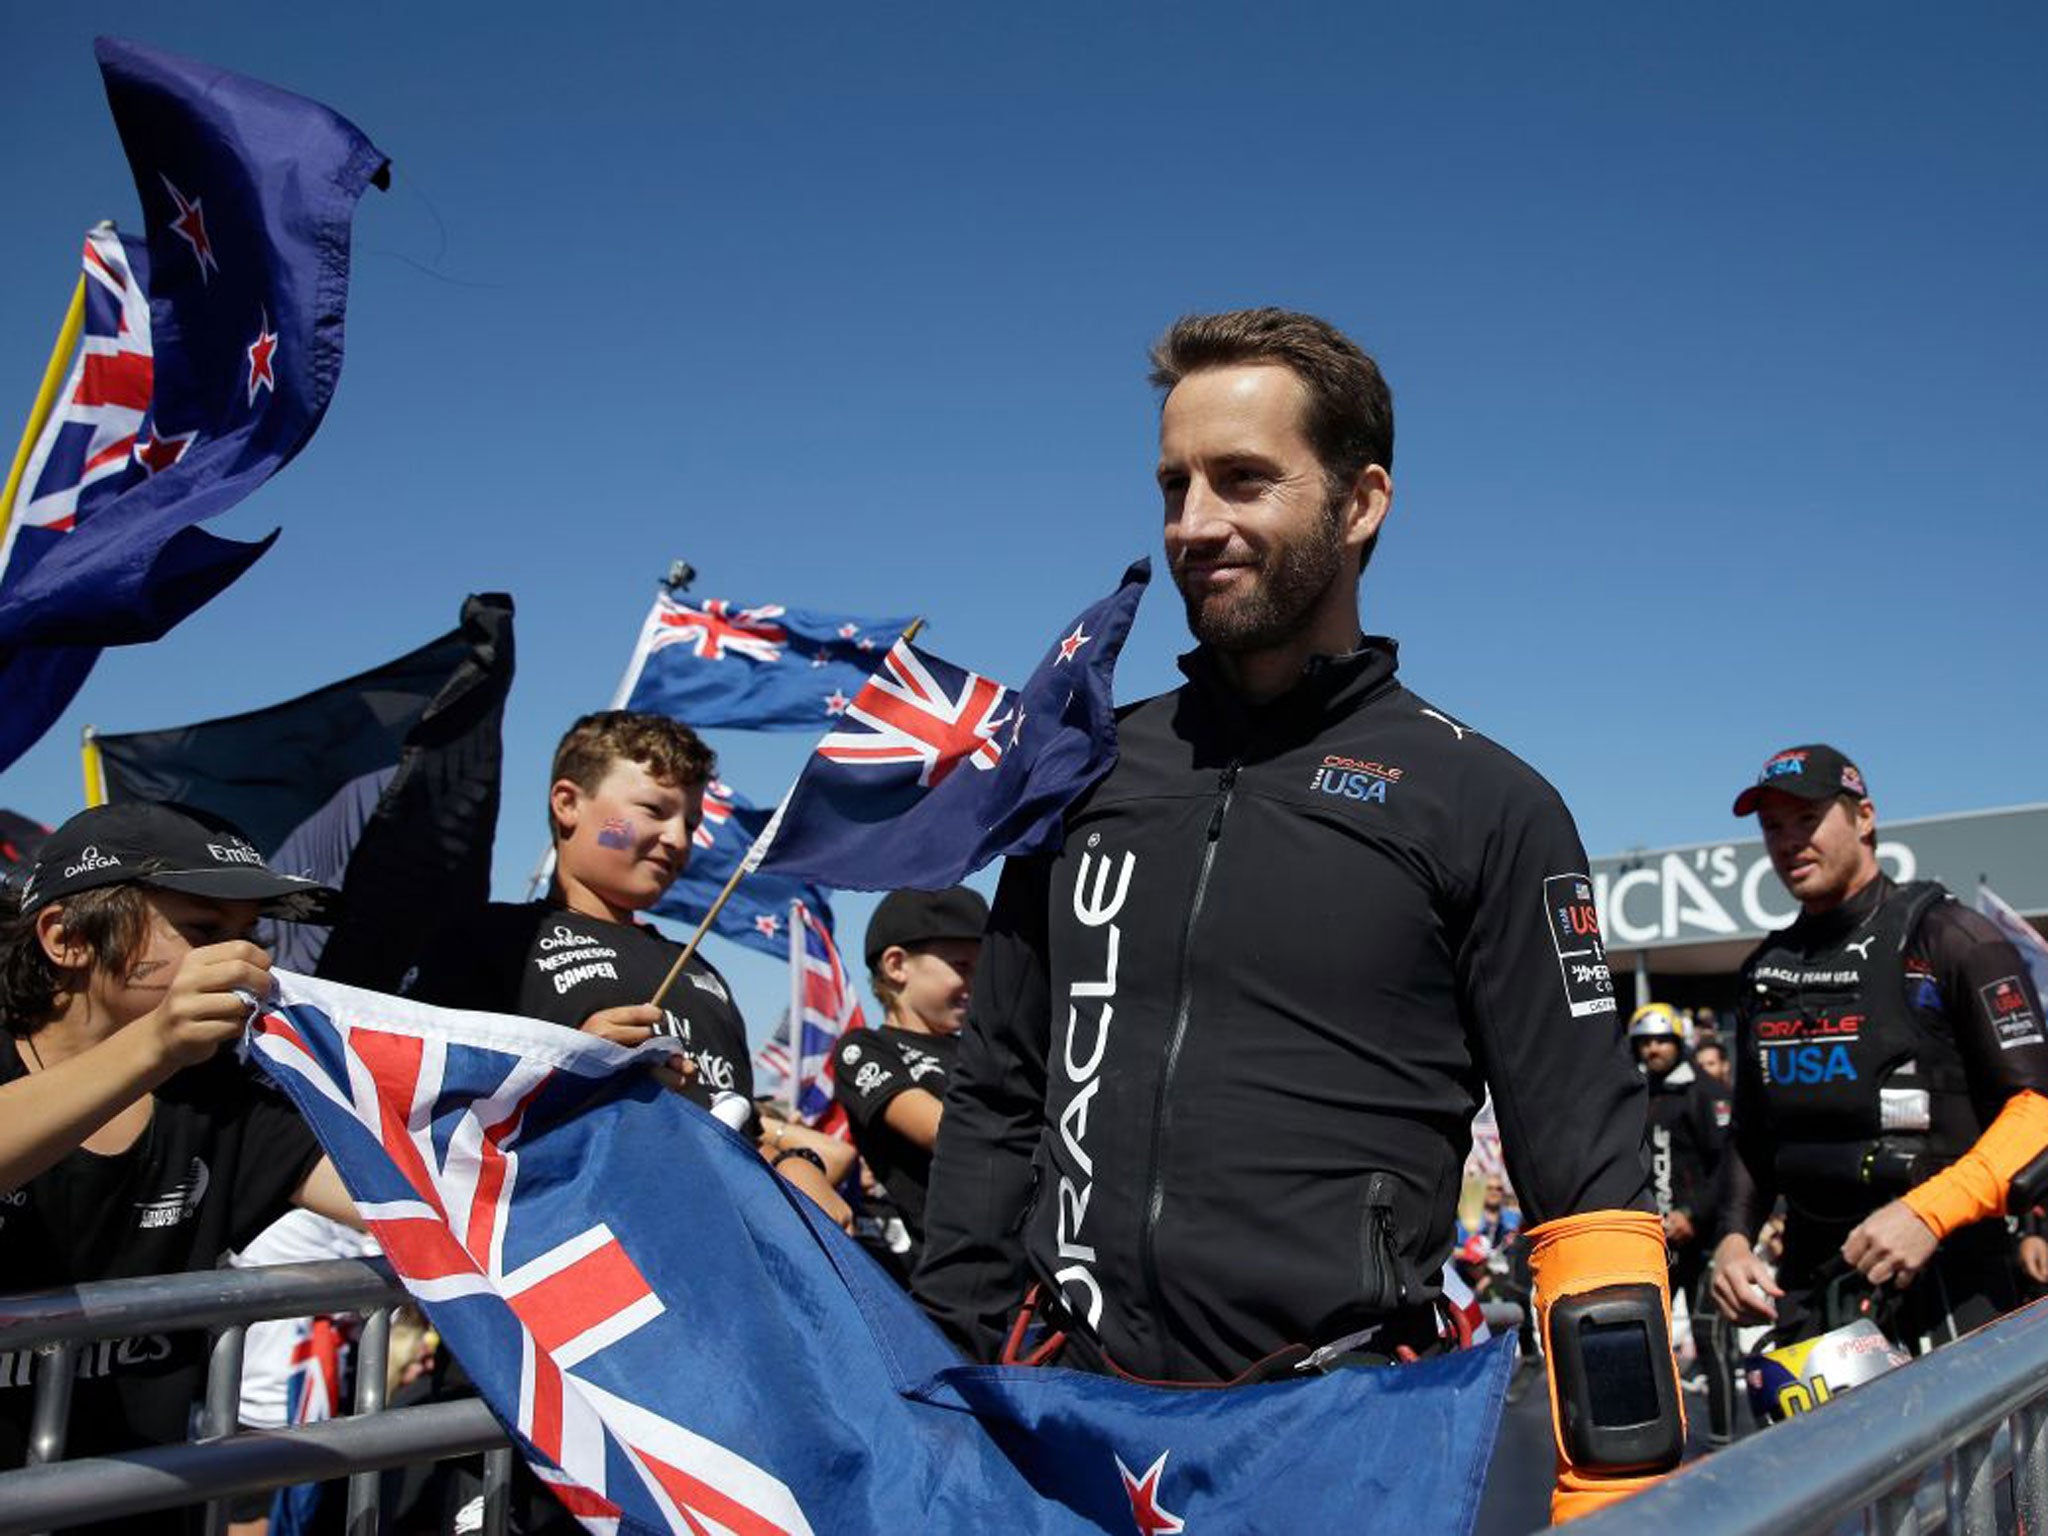 Ben Ainslie, the ruthless victor of the America’s Cup